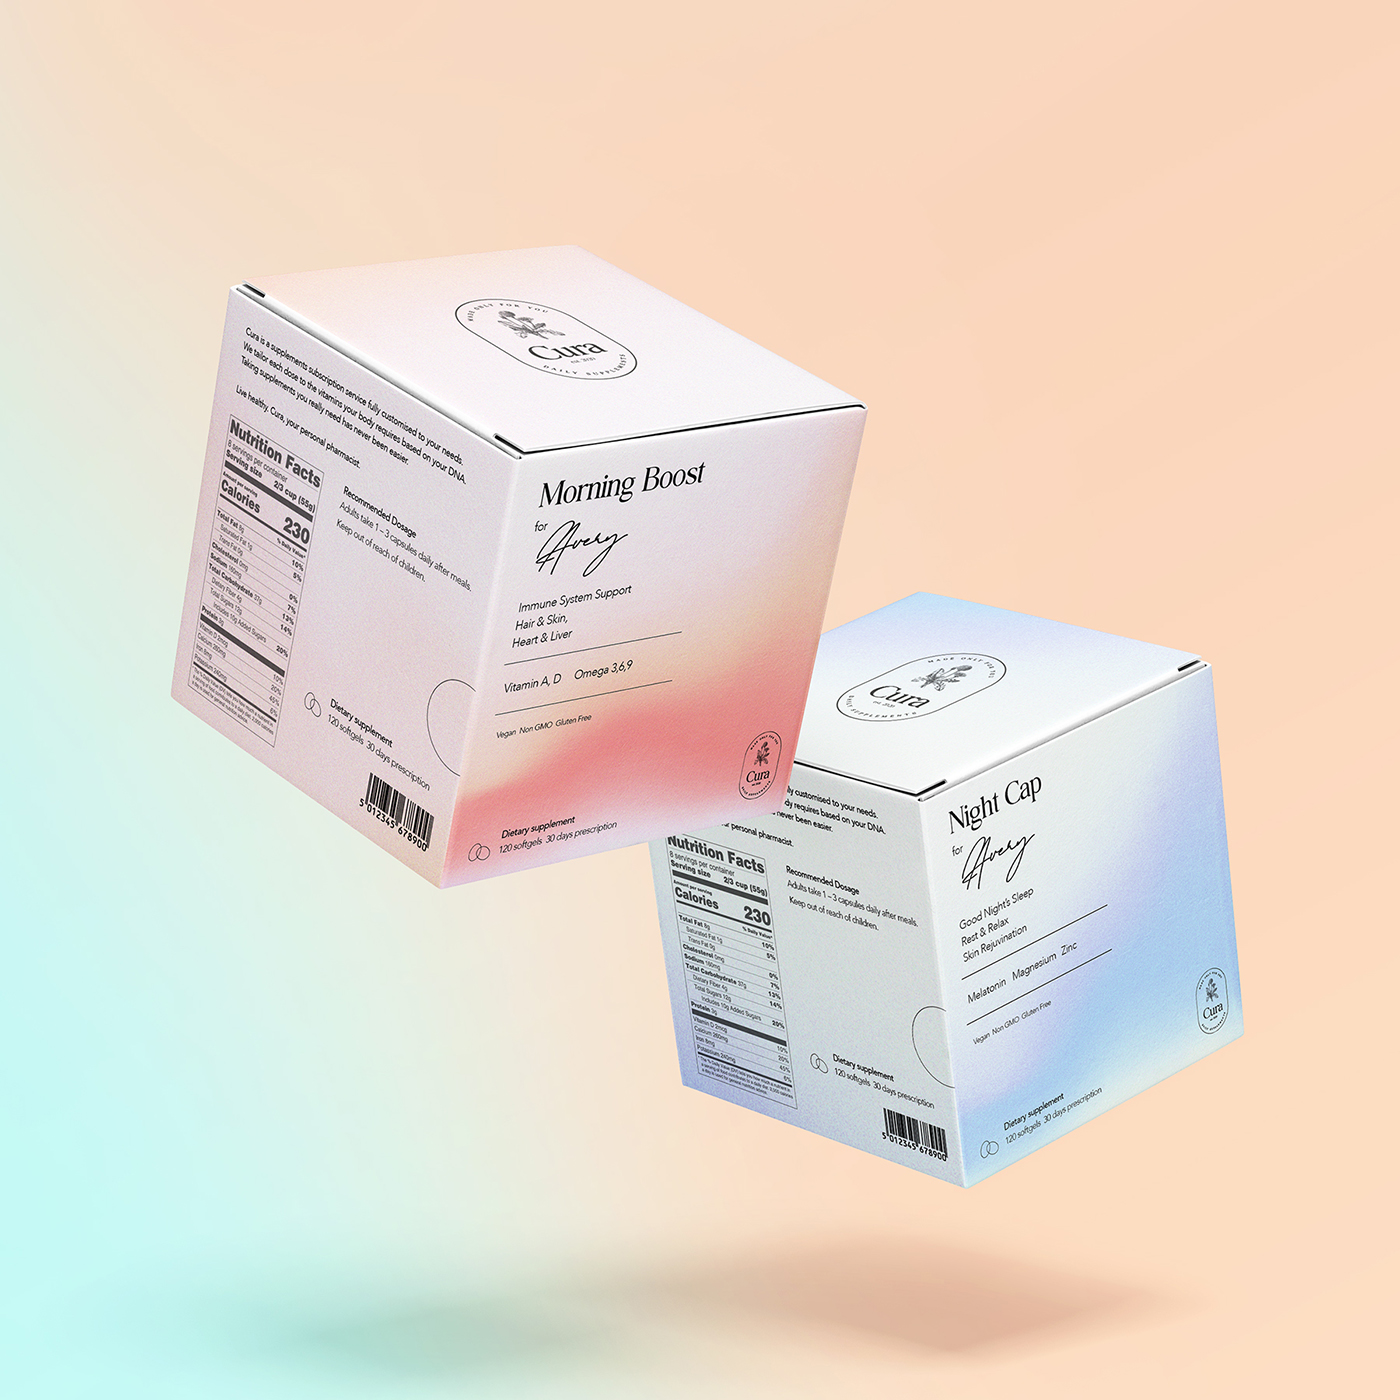 Cura Your Daily Supplement Subscription Designed by Honest Potato